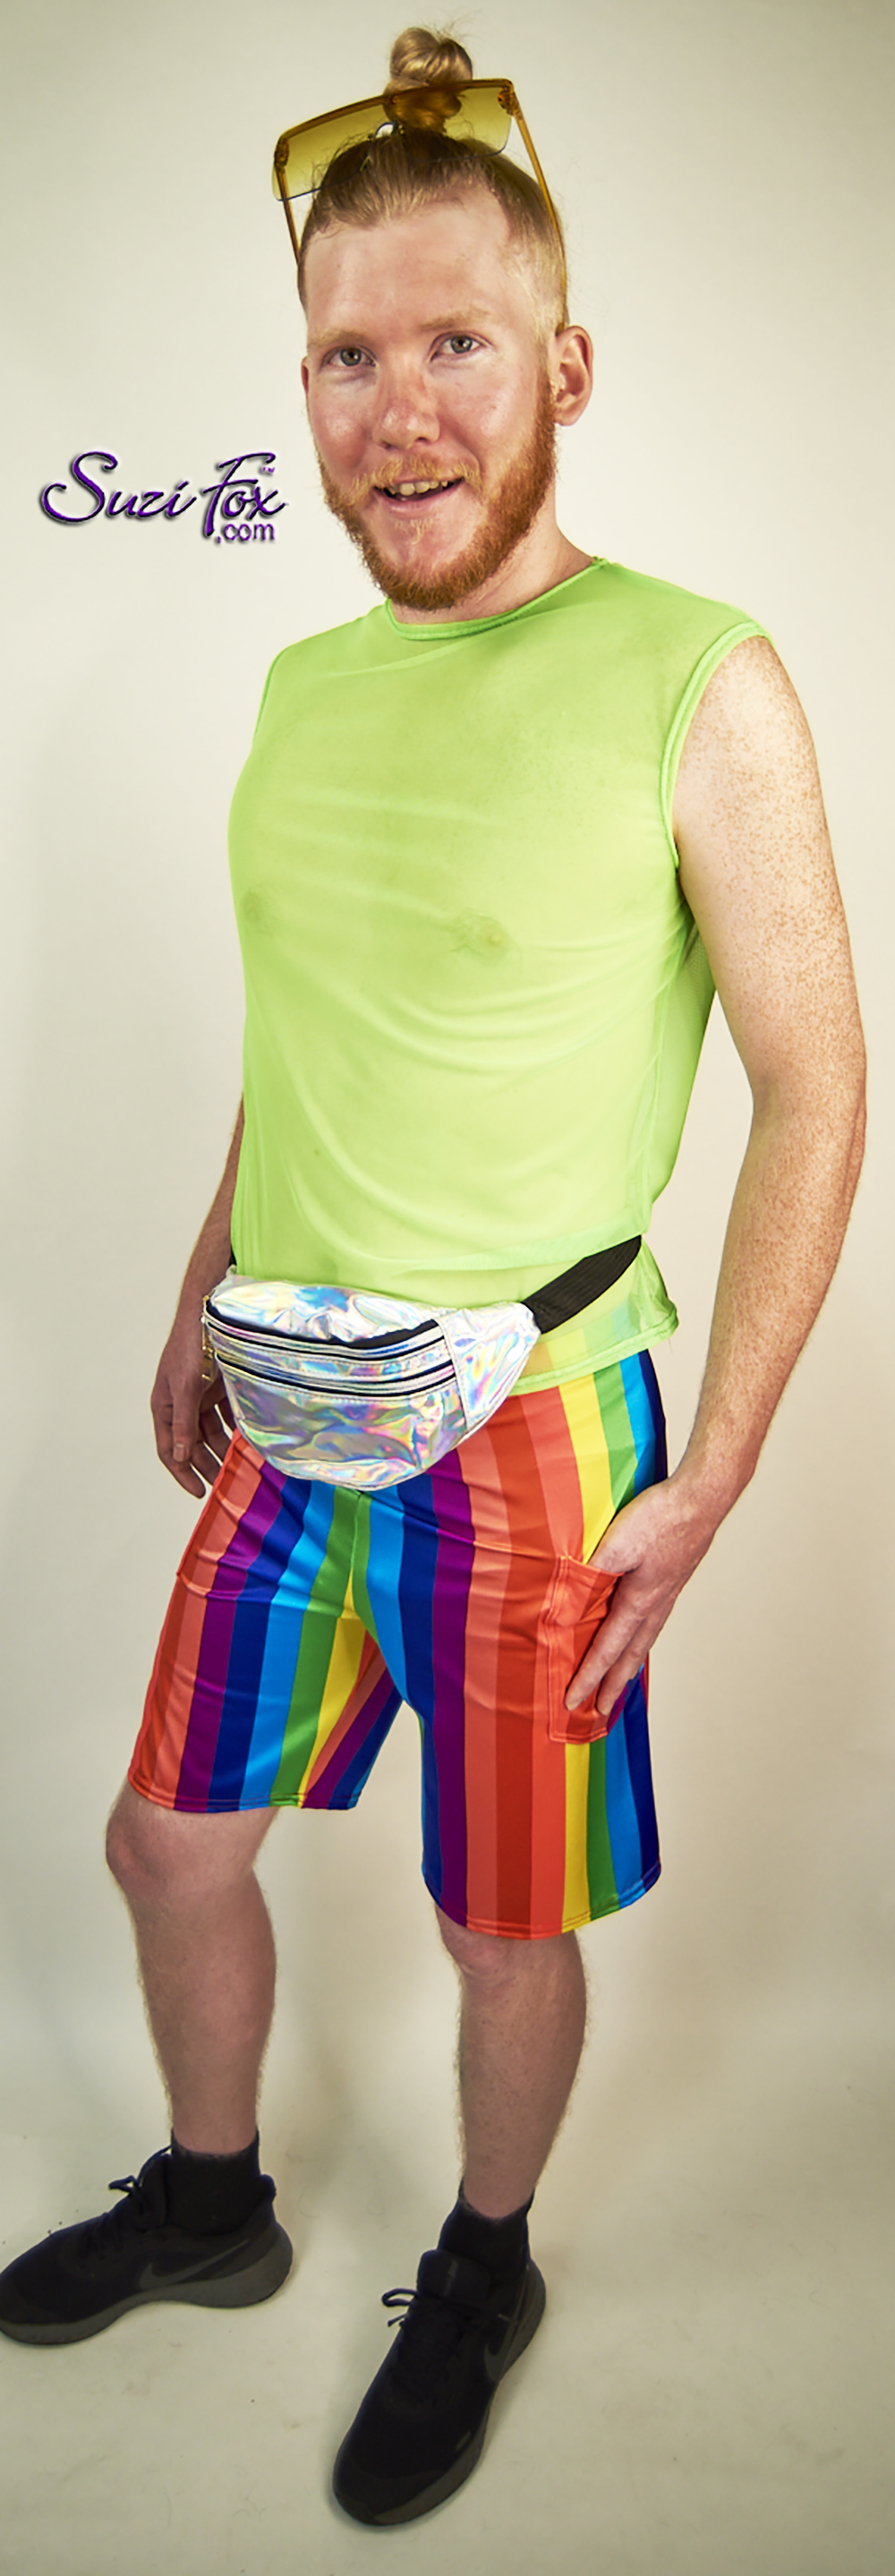 Womens Jogger pants For Raves, EDC, and Burning Man Festivals shown in  Rainbow stripe spandex custom made by Suzi Fox